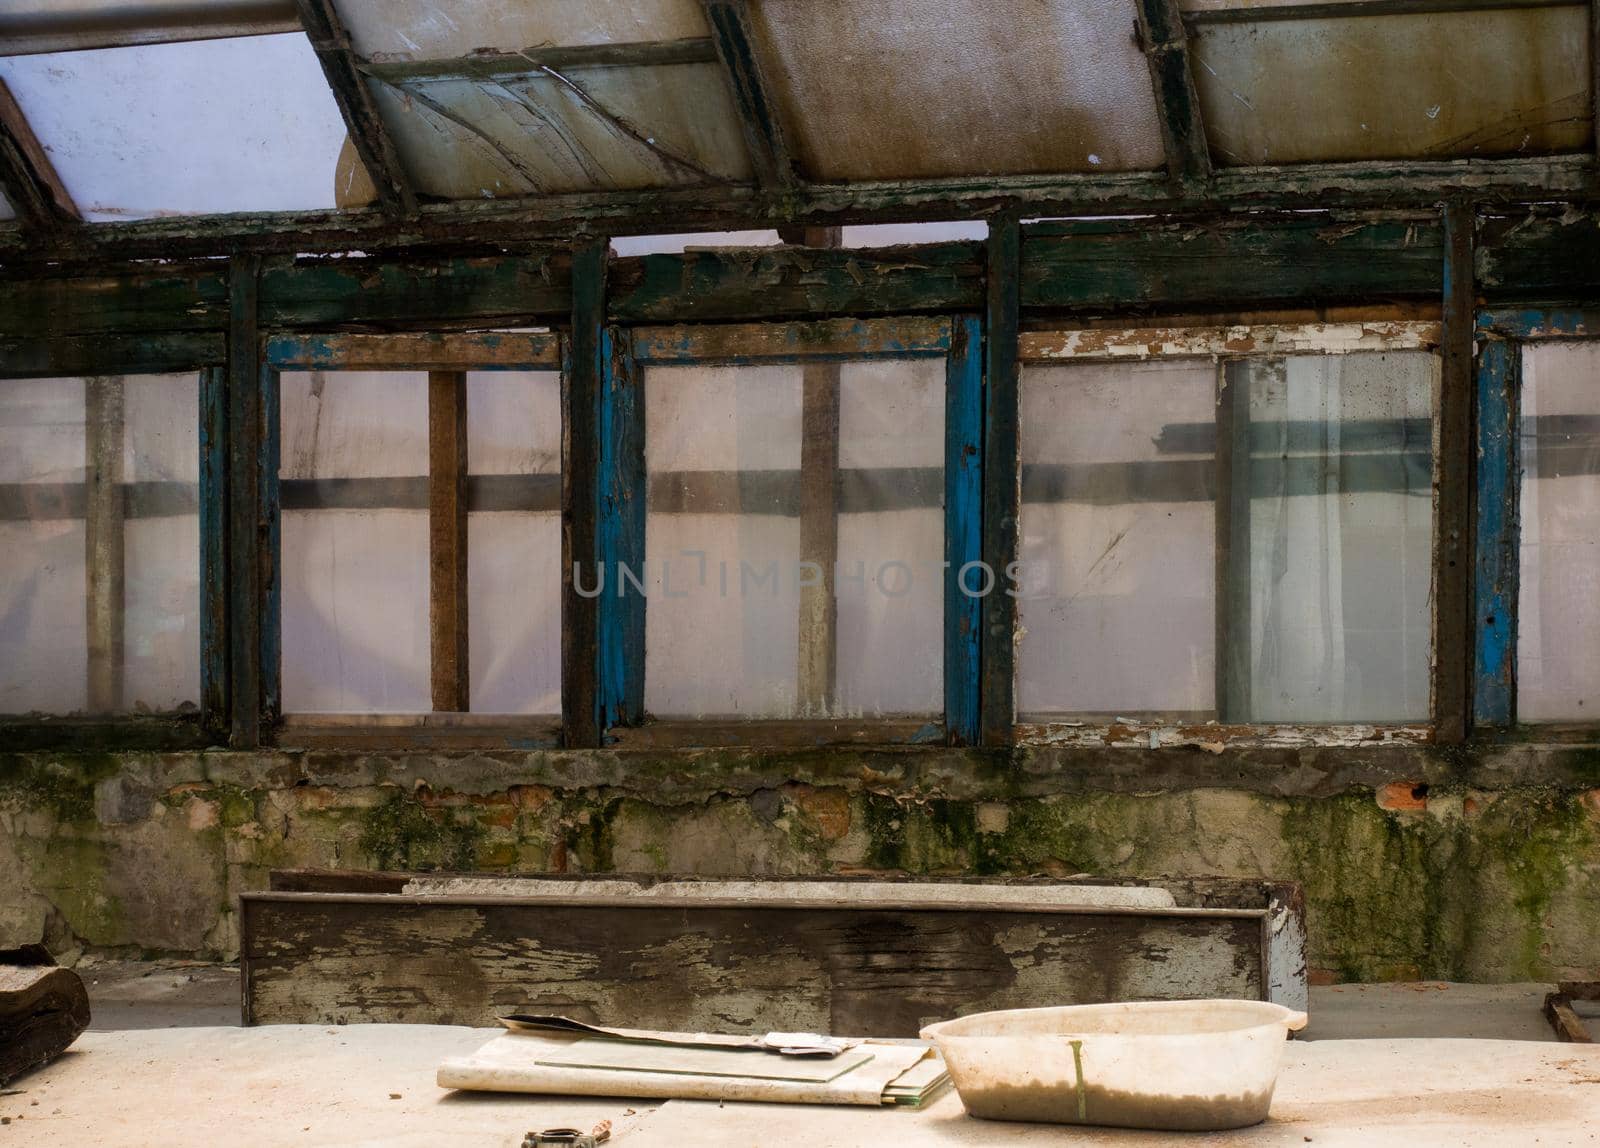 Inside the old room. Abandoned room with dirty windows. An old greenhouse.